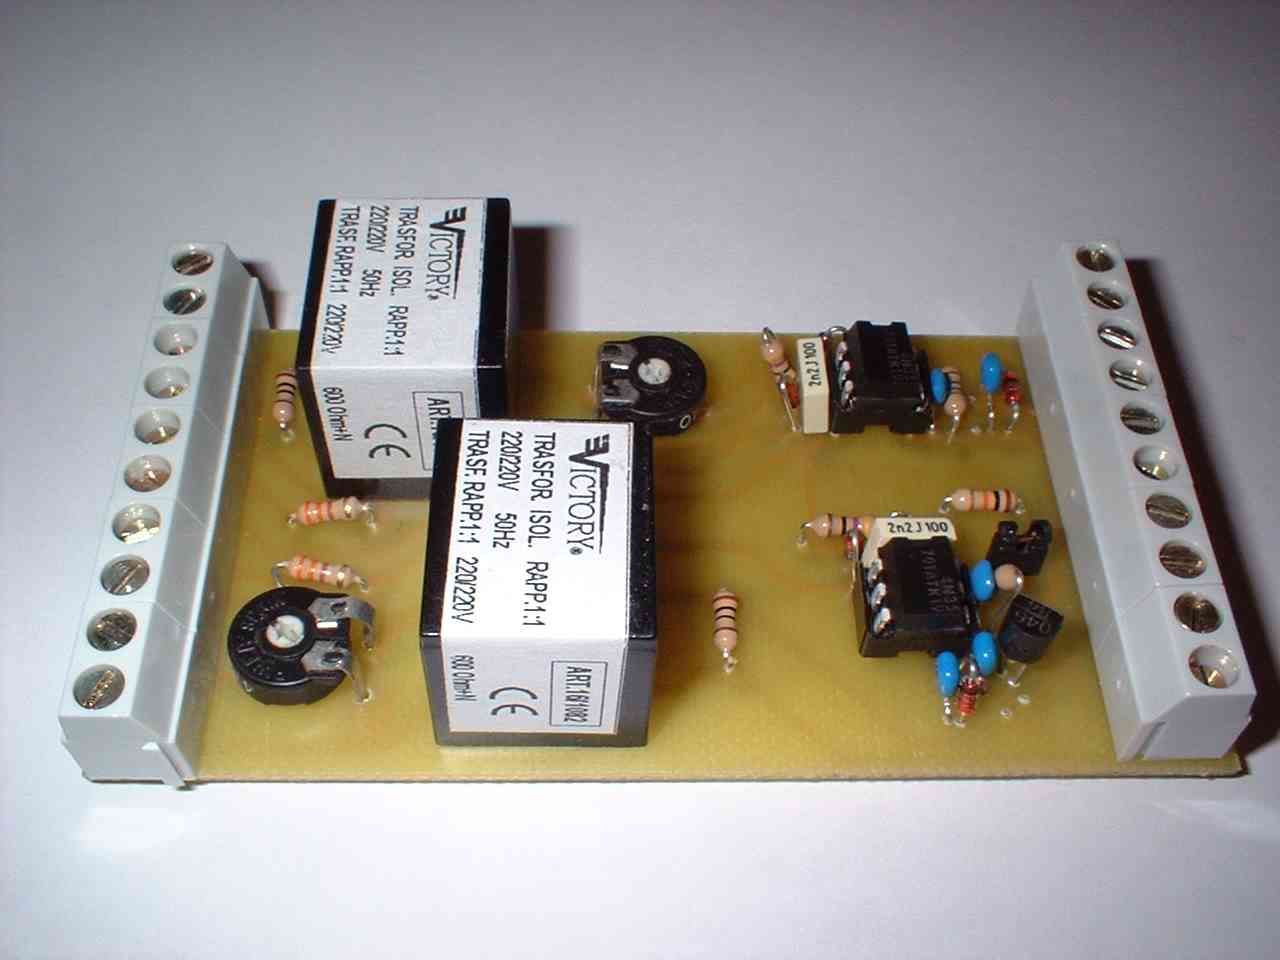 Pc to transceiver interfacing